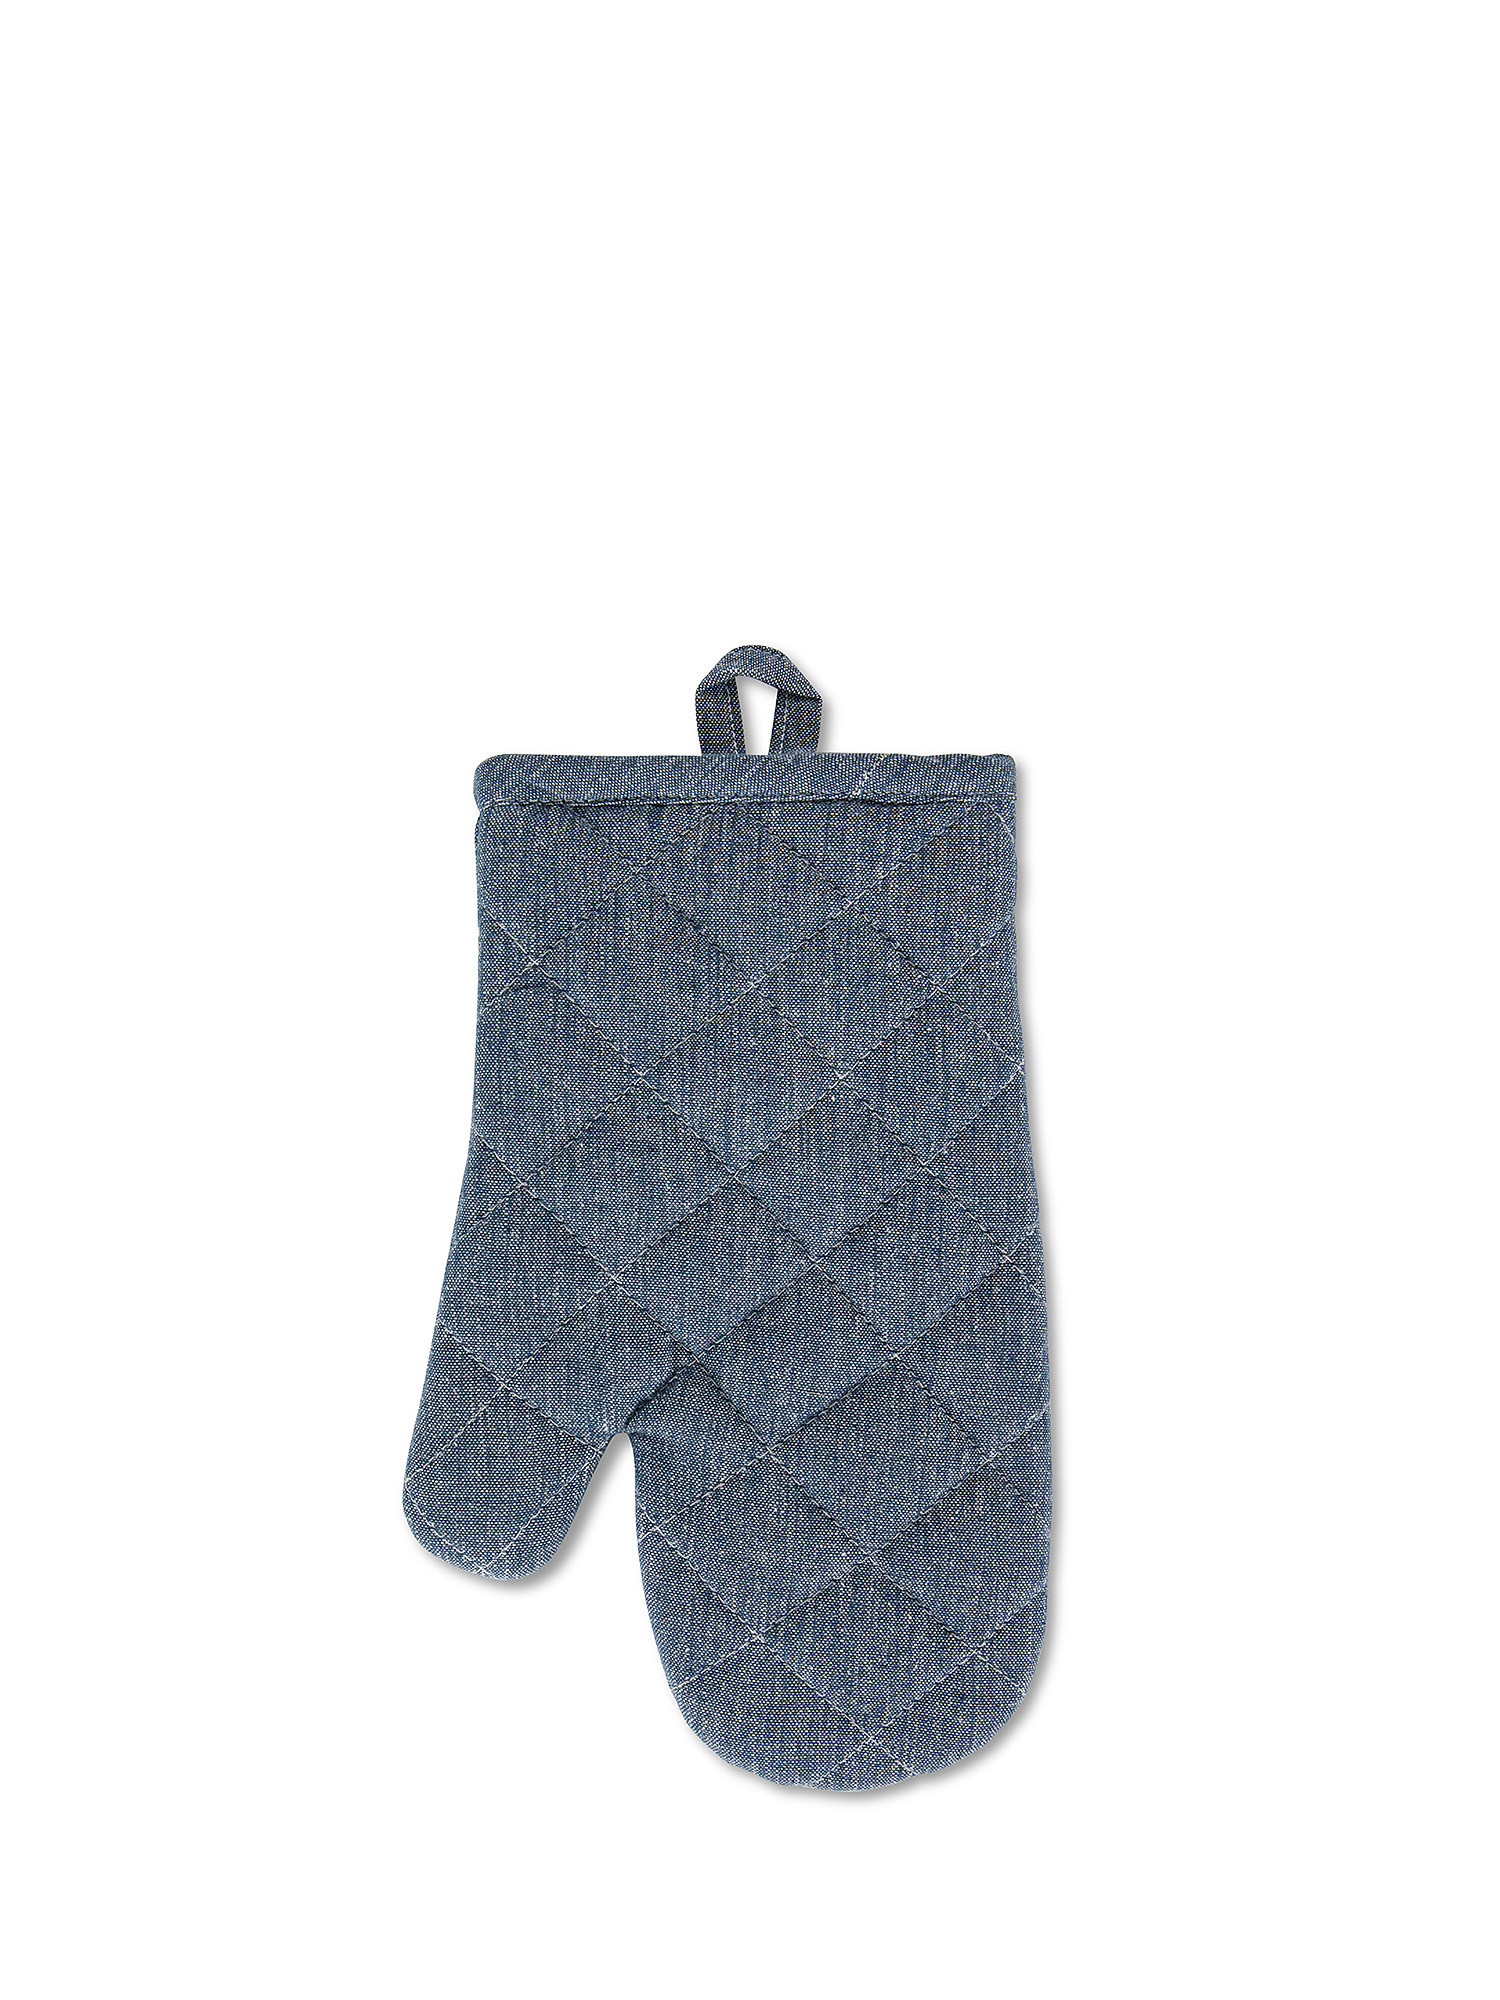 Oven mitt in cotton with braid embroidery, Light Blue, large image number 0